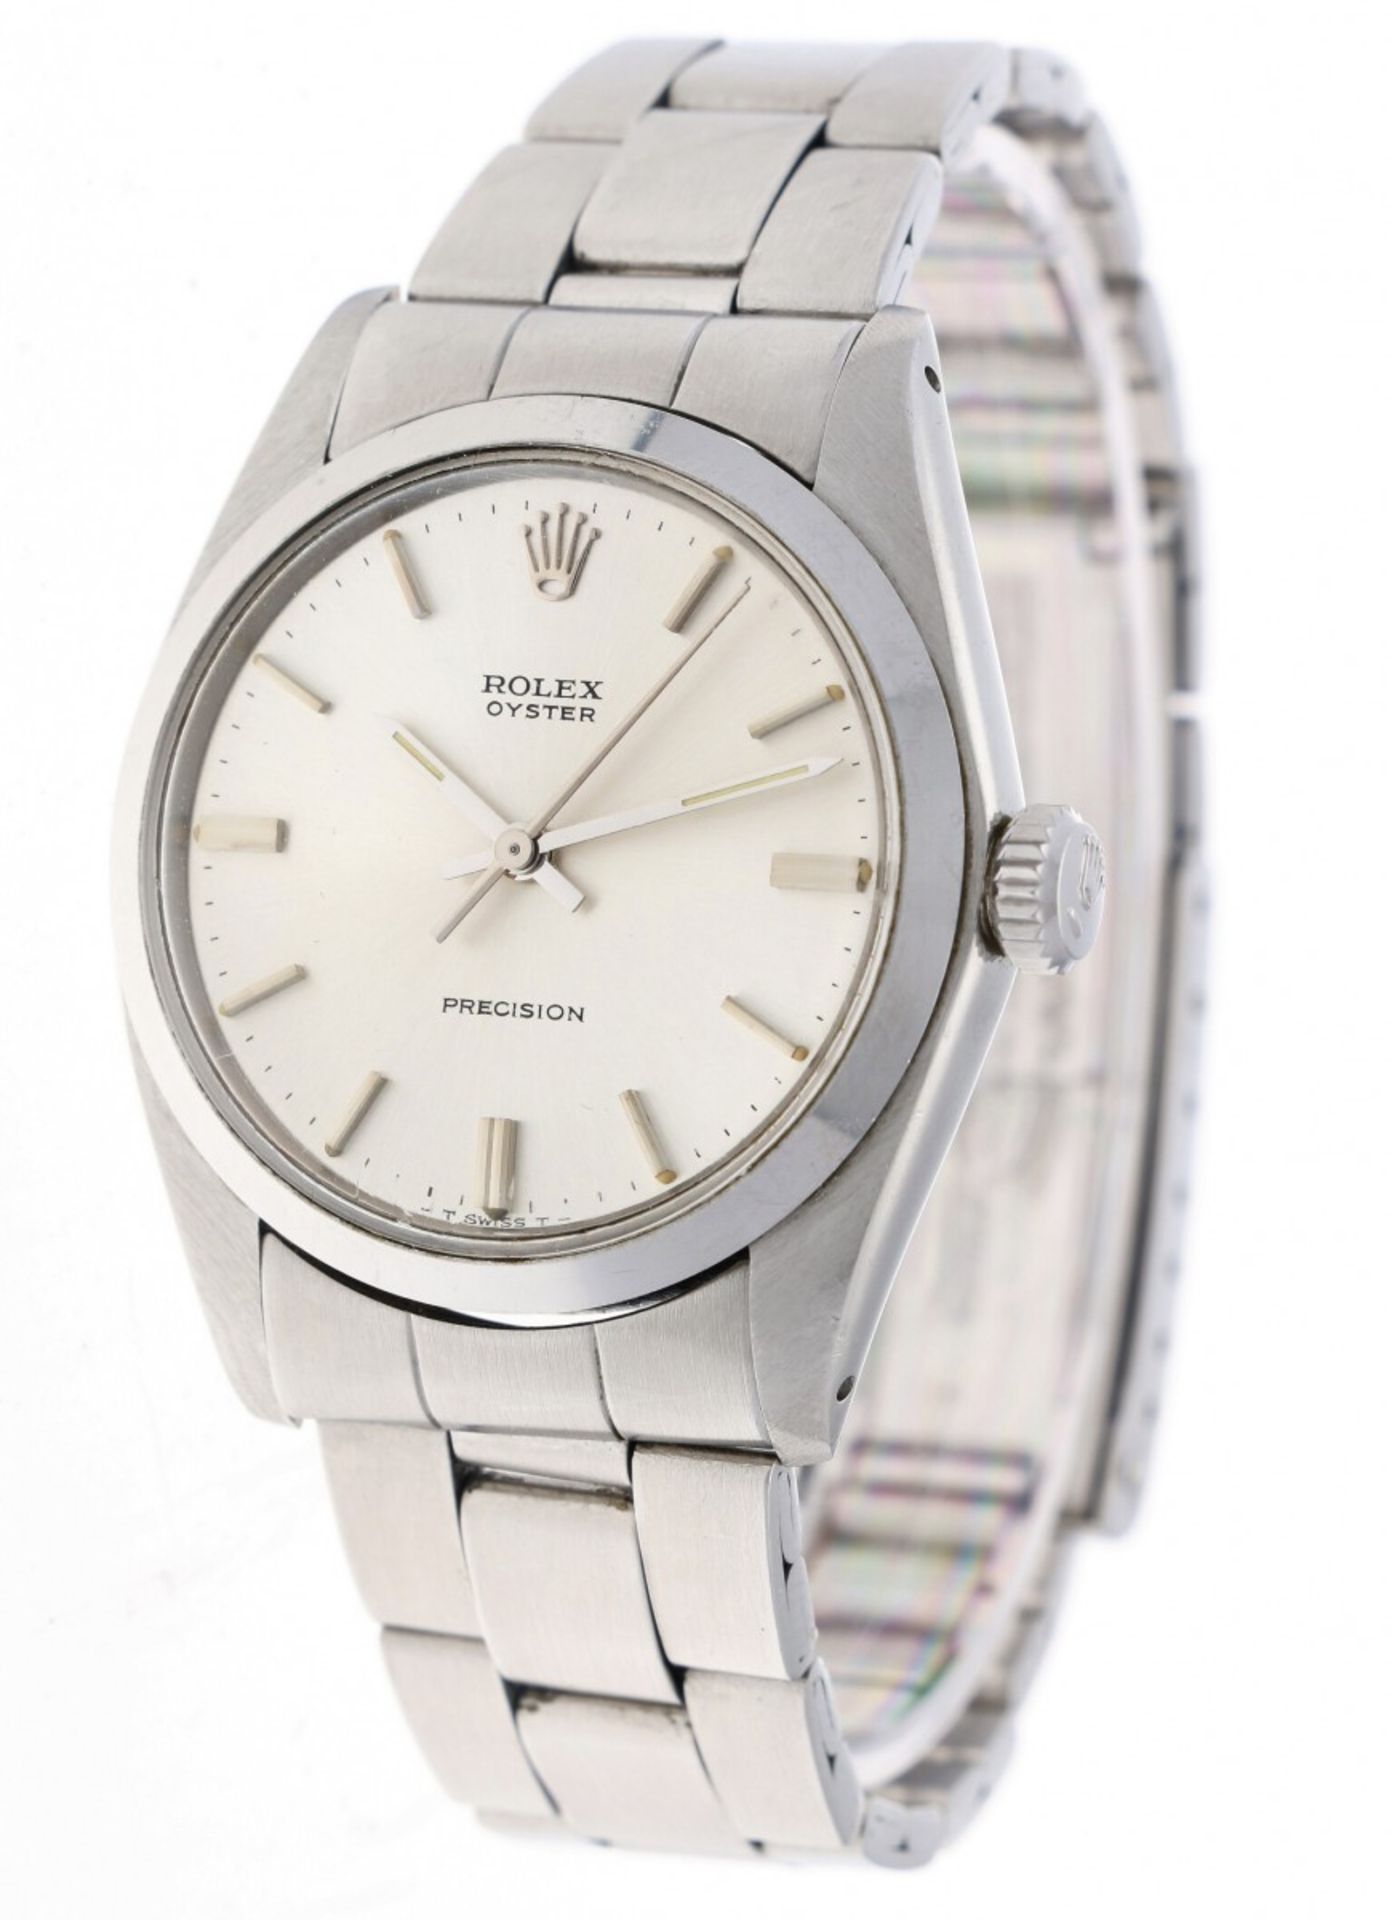 Rolex Oyster Precision 6426 - Men's watch - ca. 1973 - Image 2 of 8